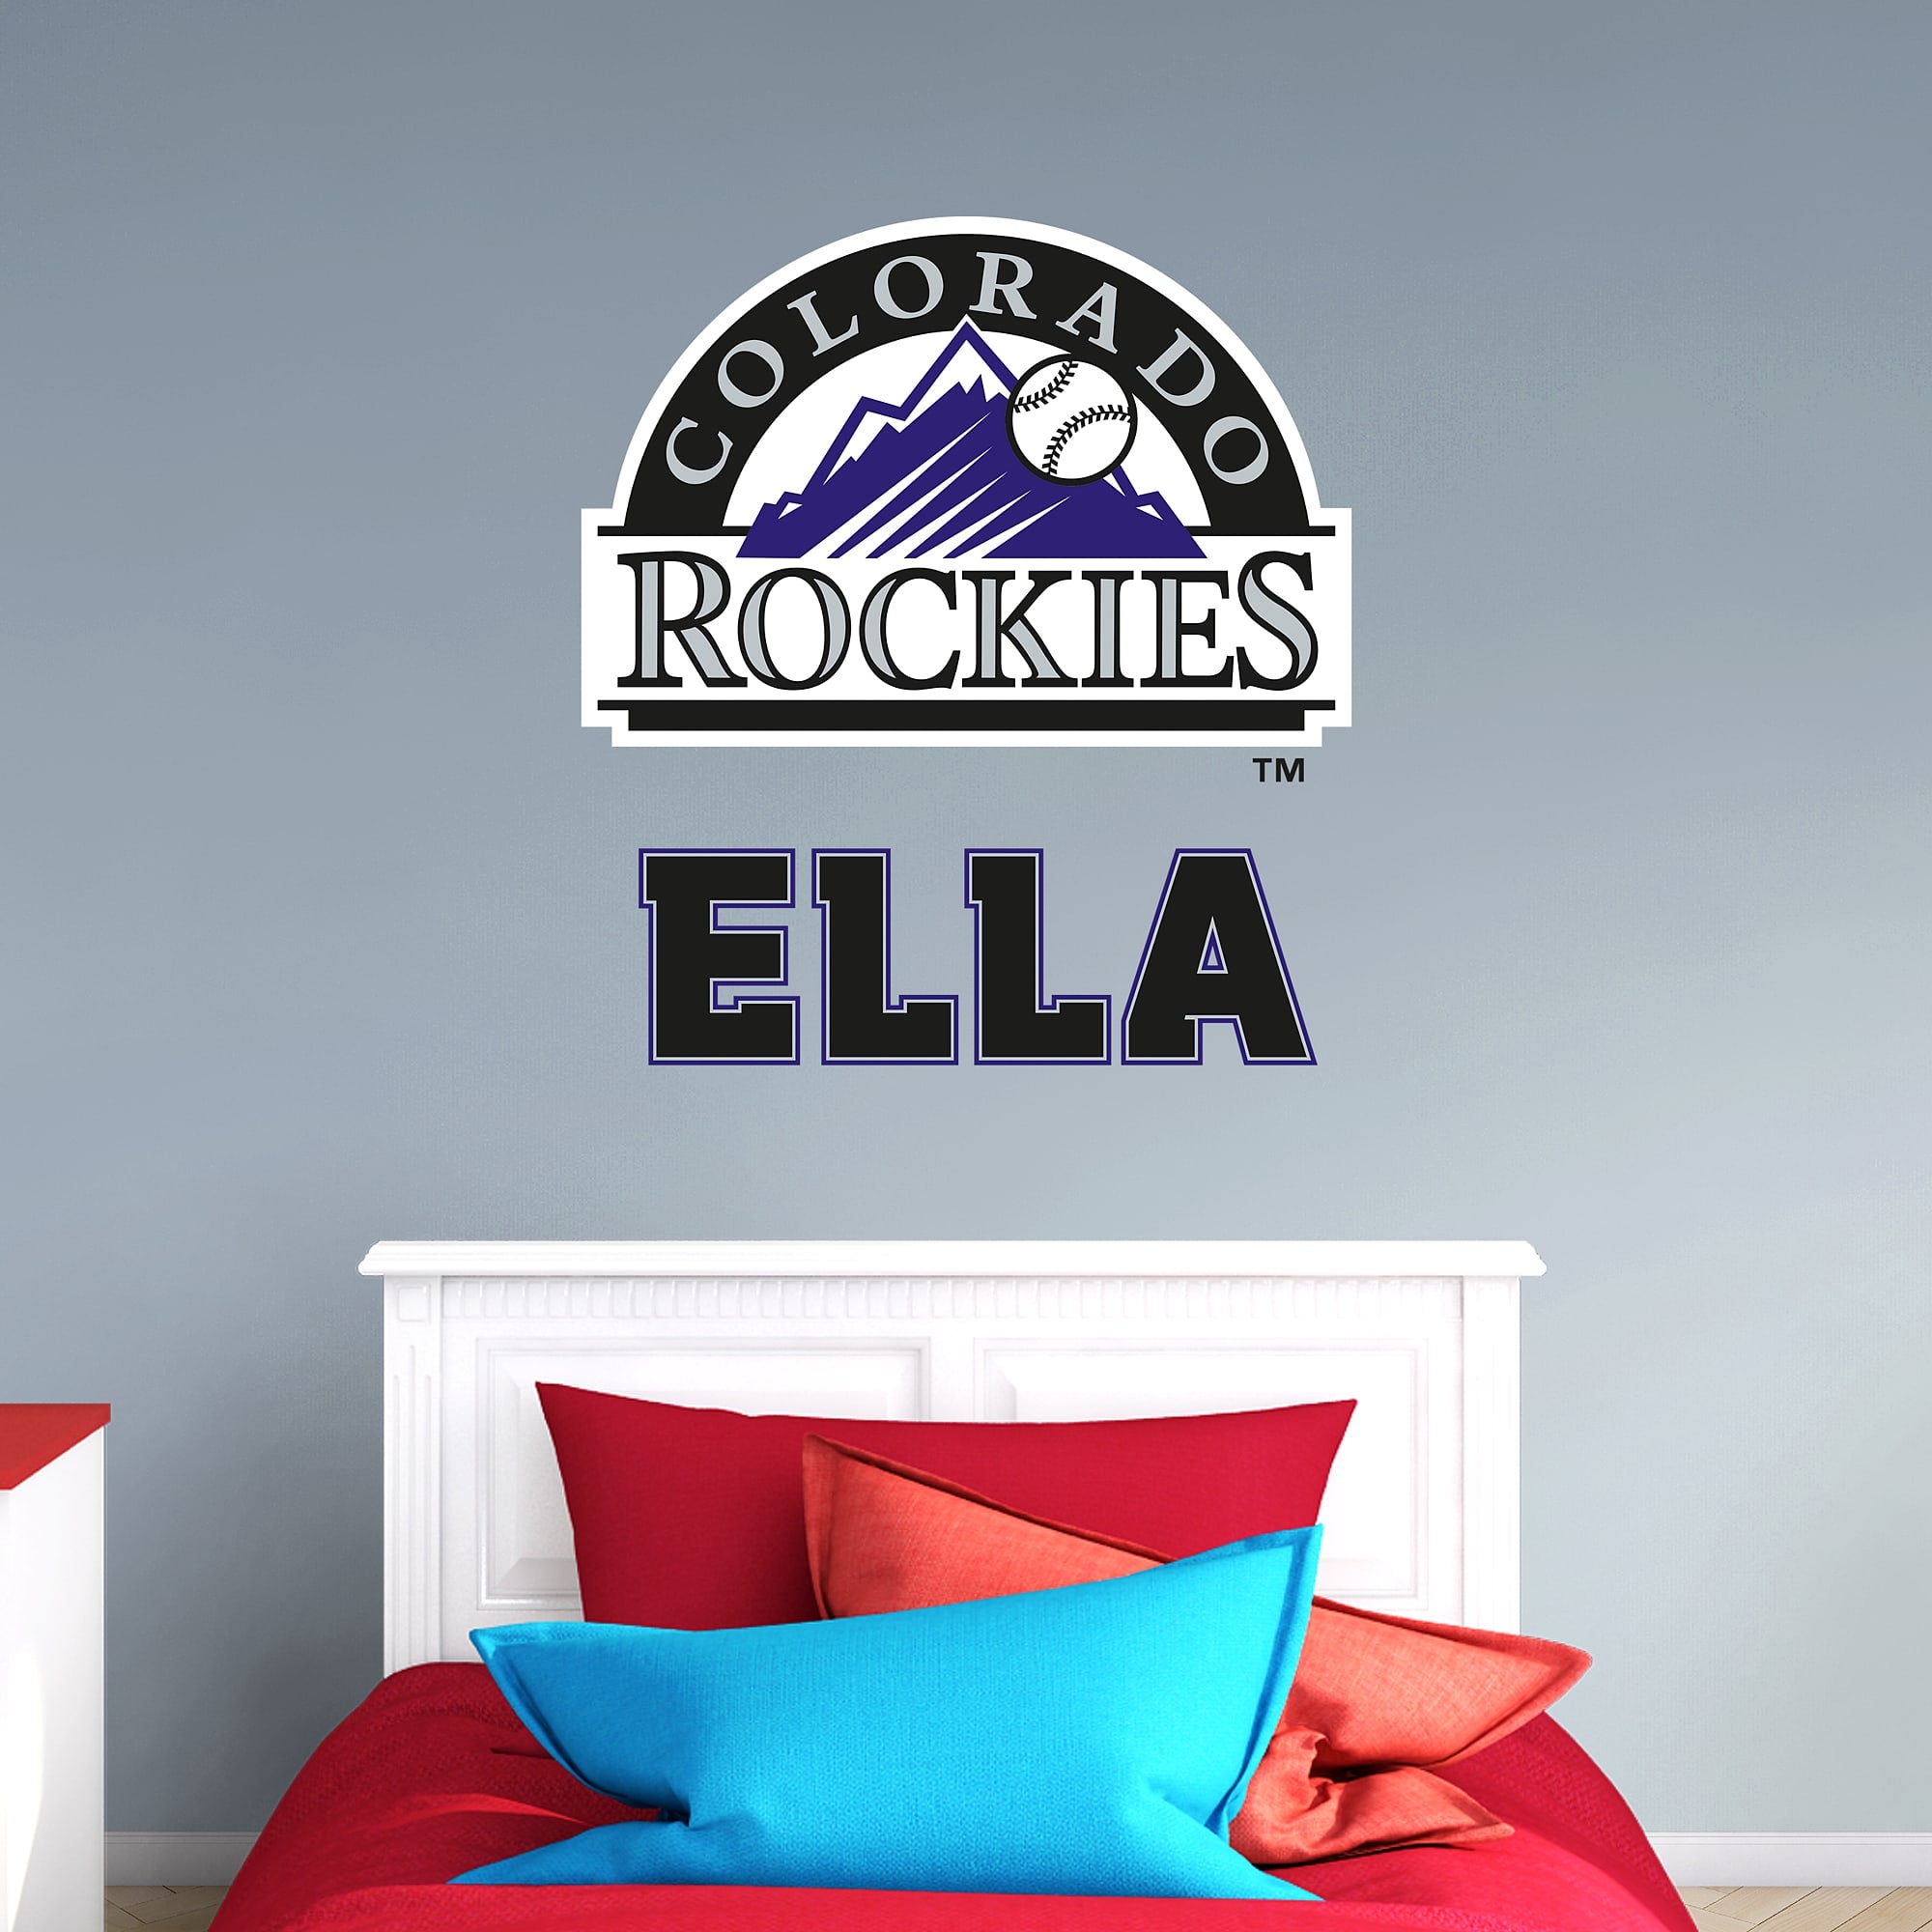 Colorado Rockies: Stacked Personalized Name - Officially Licensed MLB Transfer Decal in Black (52"W x 39.5"H) by Fathead | Vinyl